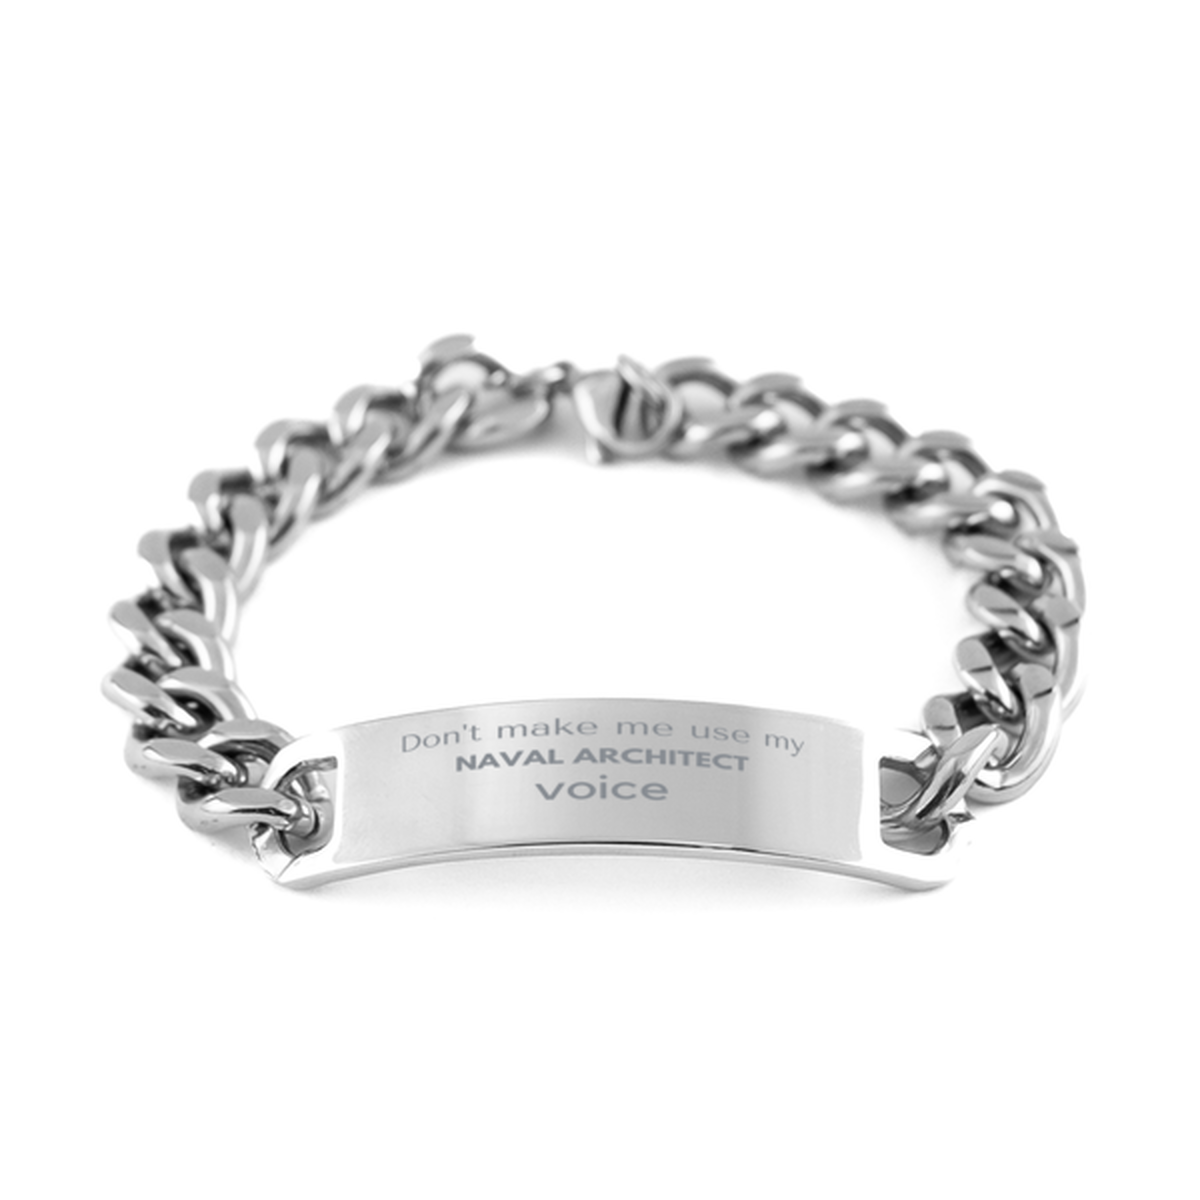 Don't make me use my Naval Architect voice, Sarcasm Naval Architect Gifts, Christmas Naval Architect Cuban Chain Stainless Steel Bracelet Birthday Unique Gifts For Naval Architect Coworkers, Men, Women, Colleague, Friends